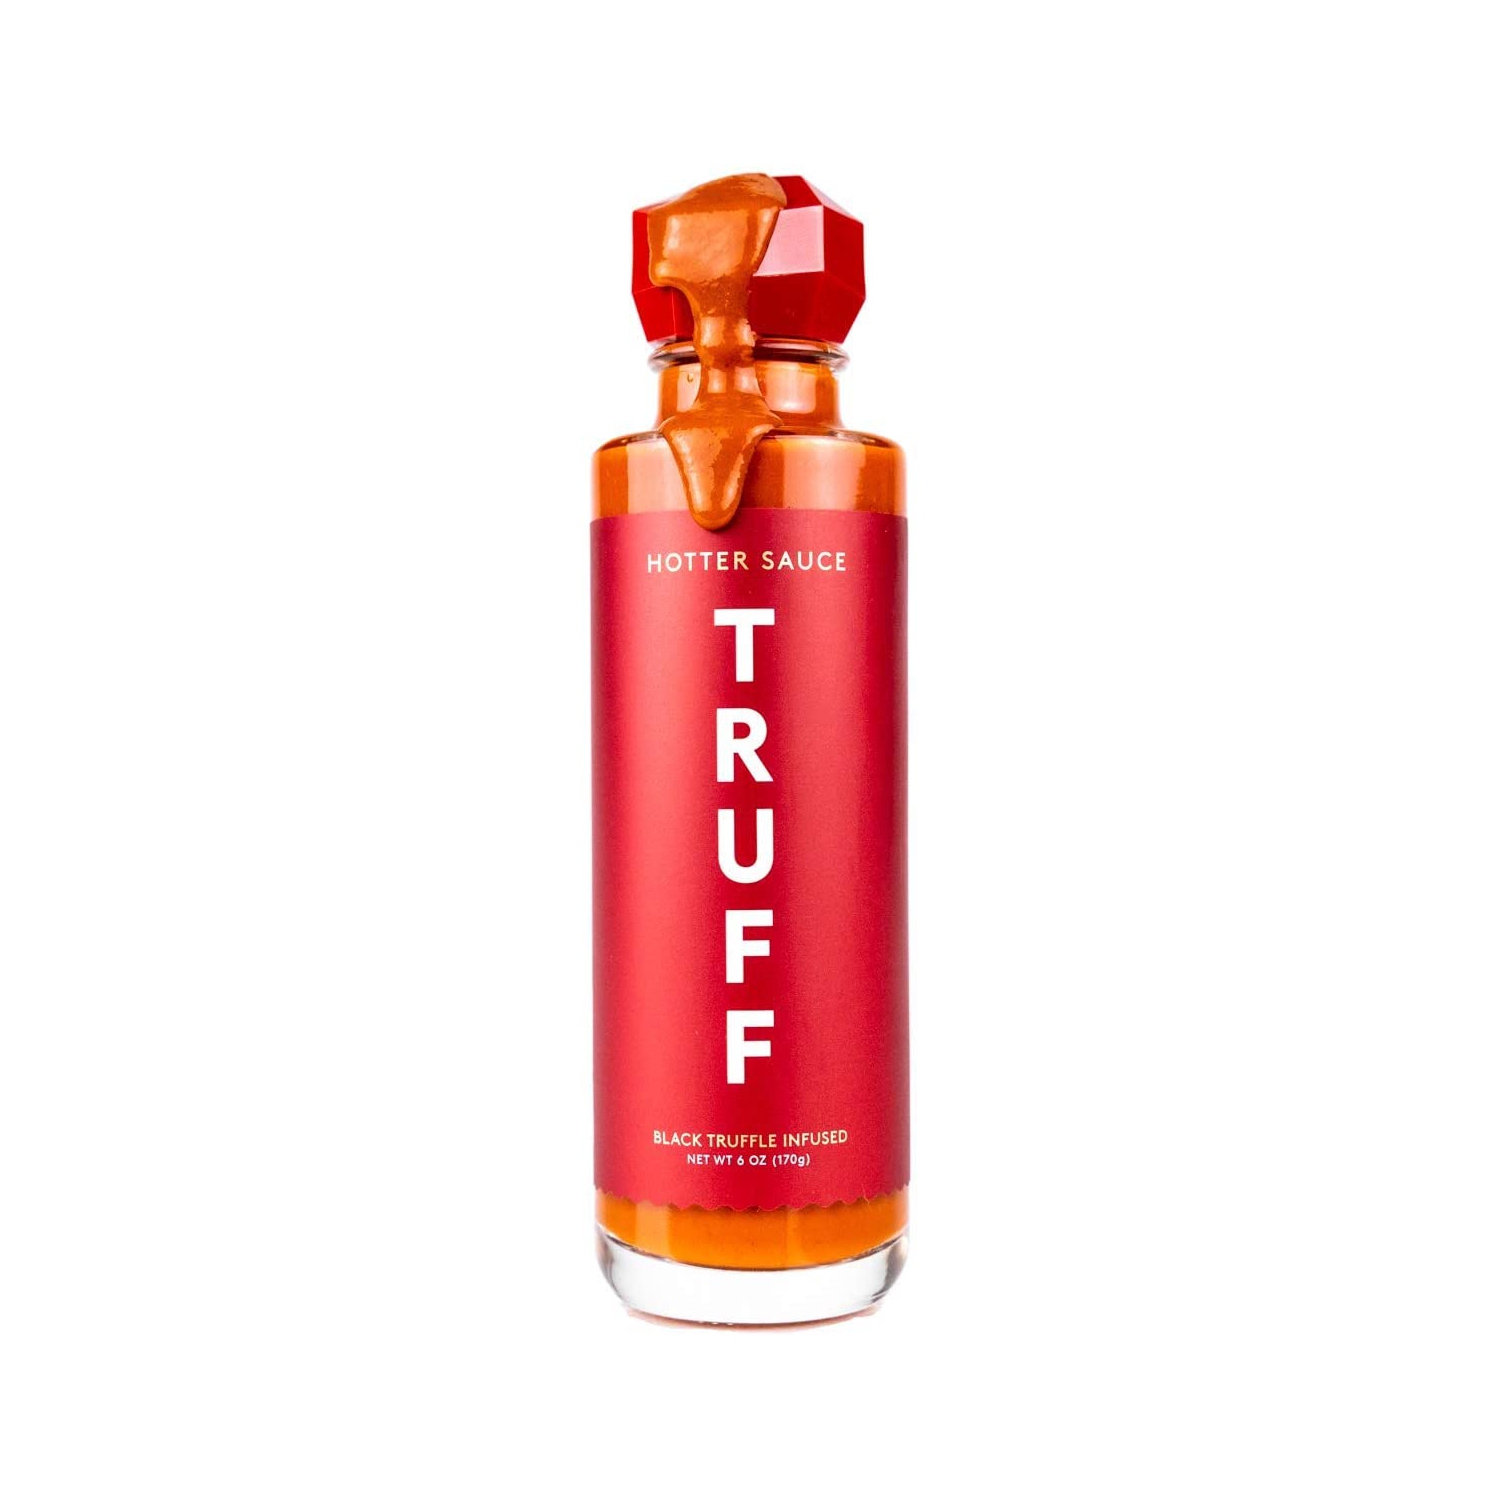 TRUFF Hotter Sauce, Gourmet Hot Sauce with Jalapeño, Red Chili Peppers with More Heat, Black Truffle Oil, Organic Agave Nectar, Hotter Flavor Experience in a Bottle, 6 oz.